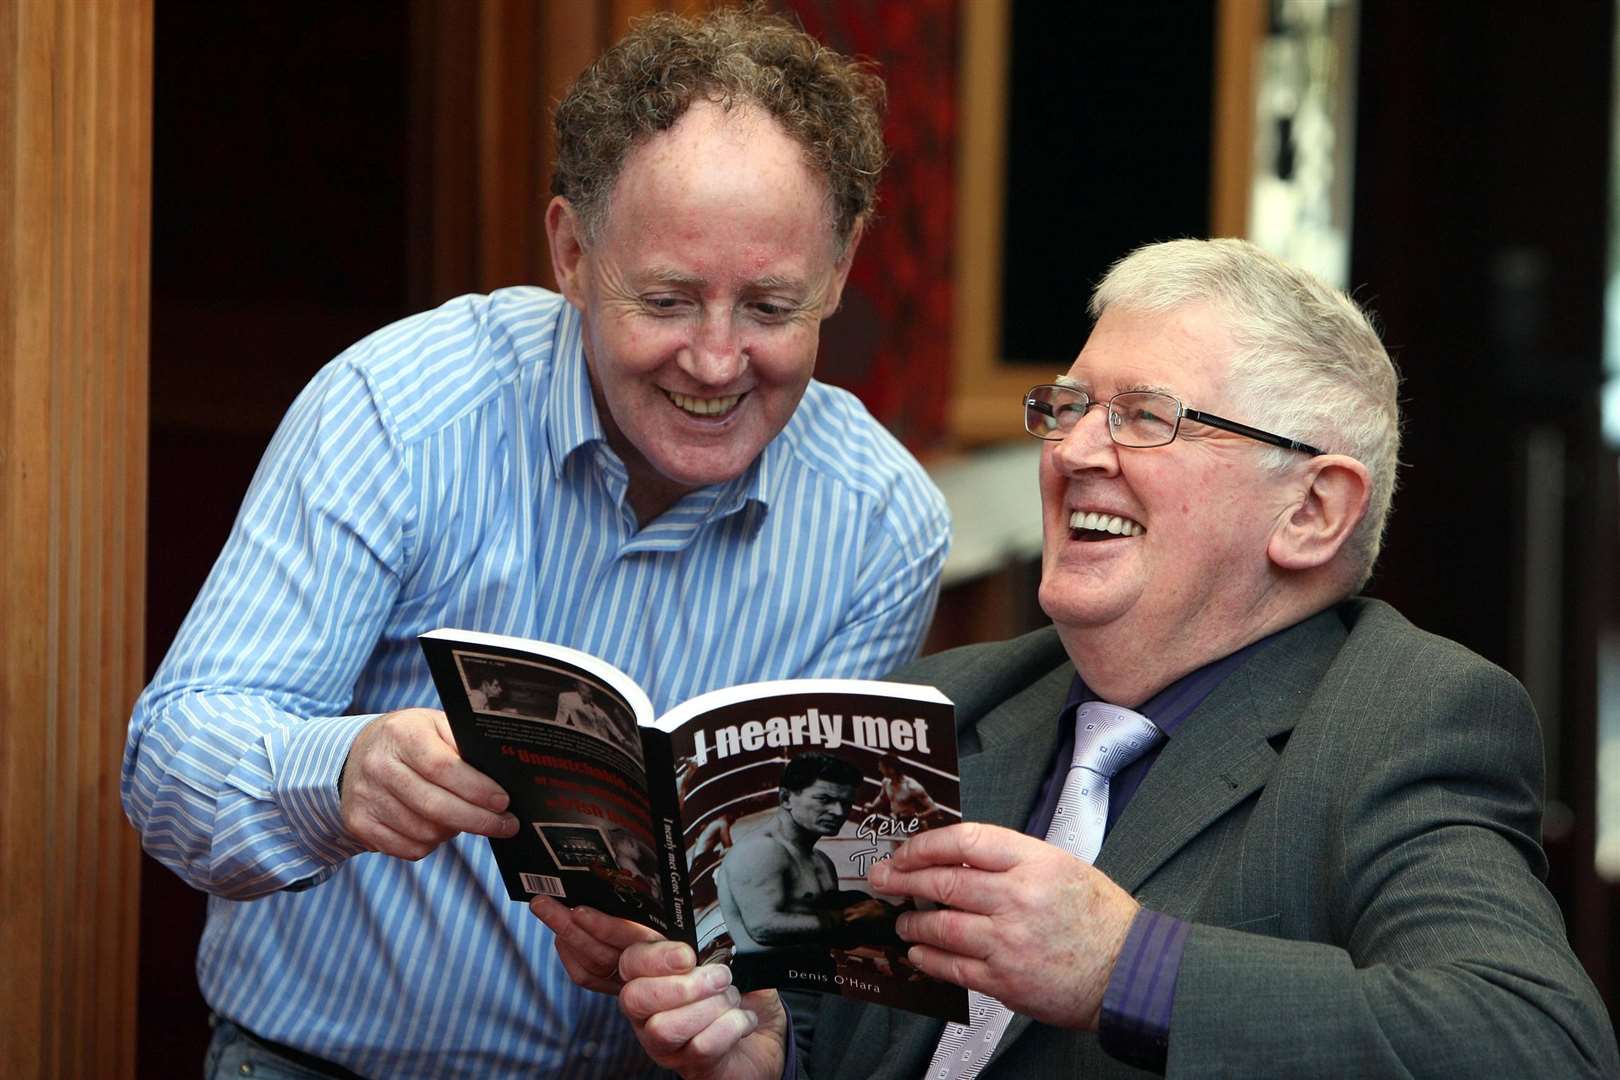 Author Denis O’Hara (right) at the launch of his new book ‘I nearly met Gene Tunney’ at the Balmoral hotel in Belfast, with Hugh Russell, former undefeated British Flyweight champion (left) (Paul Faith/PA)